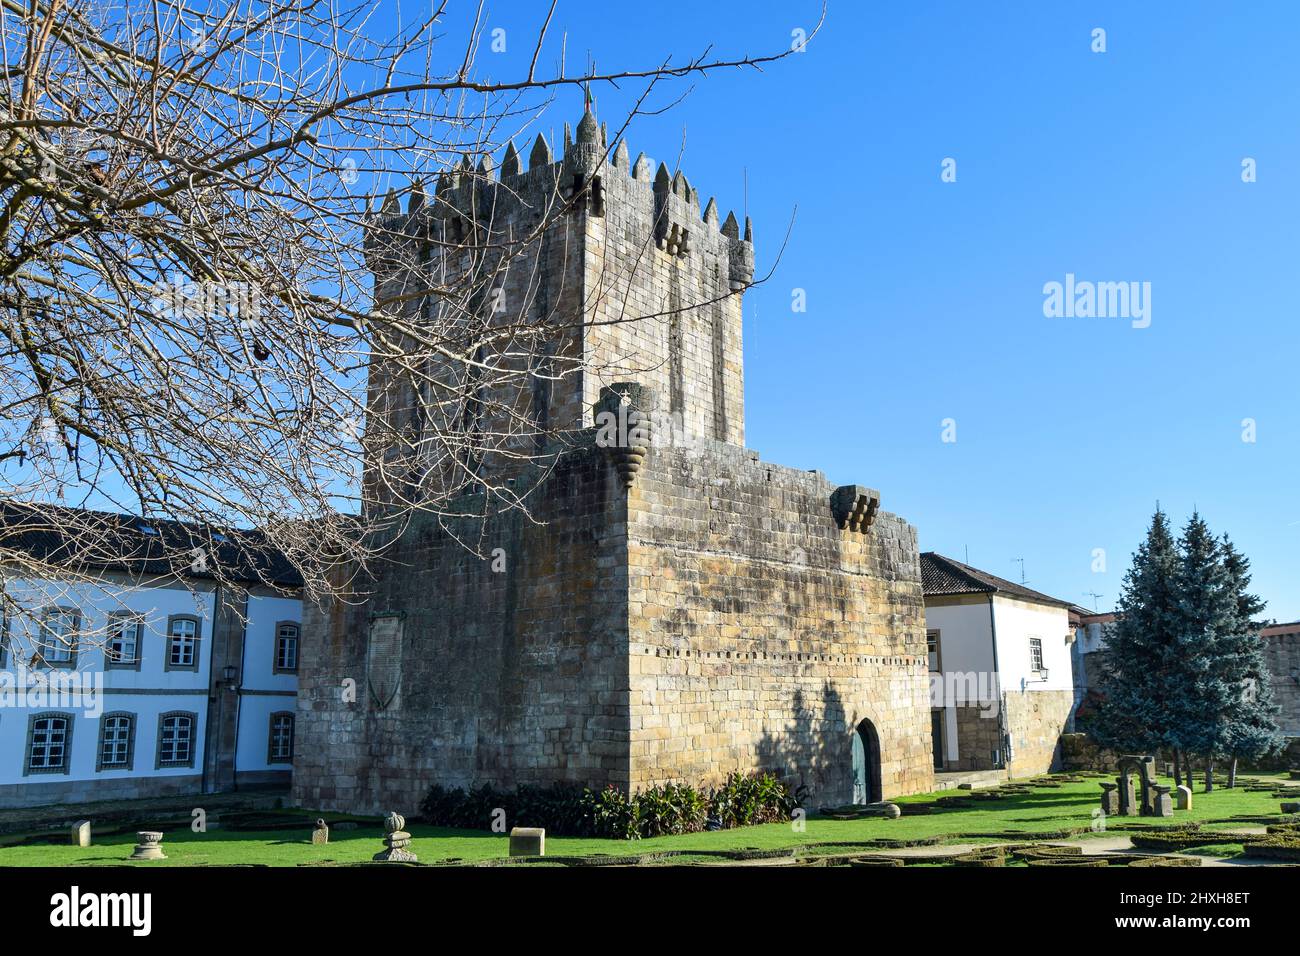 Castle of Chaves (Portuguese: Castelo de Chaves) is a medieval castle situated in the civil parish of Santa Maria Maior, in the municipality of Chaves. Stock Photo